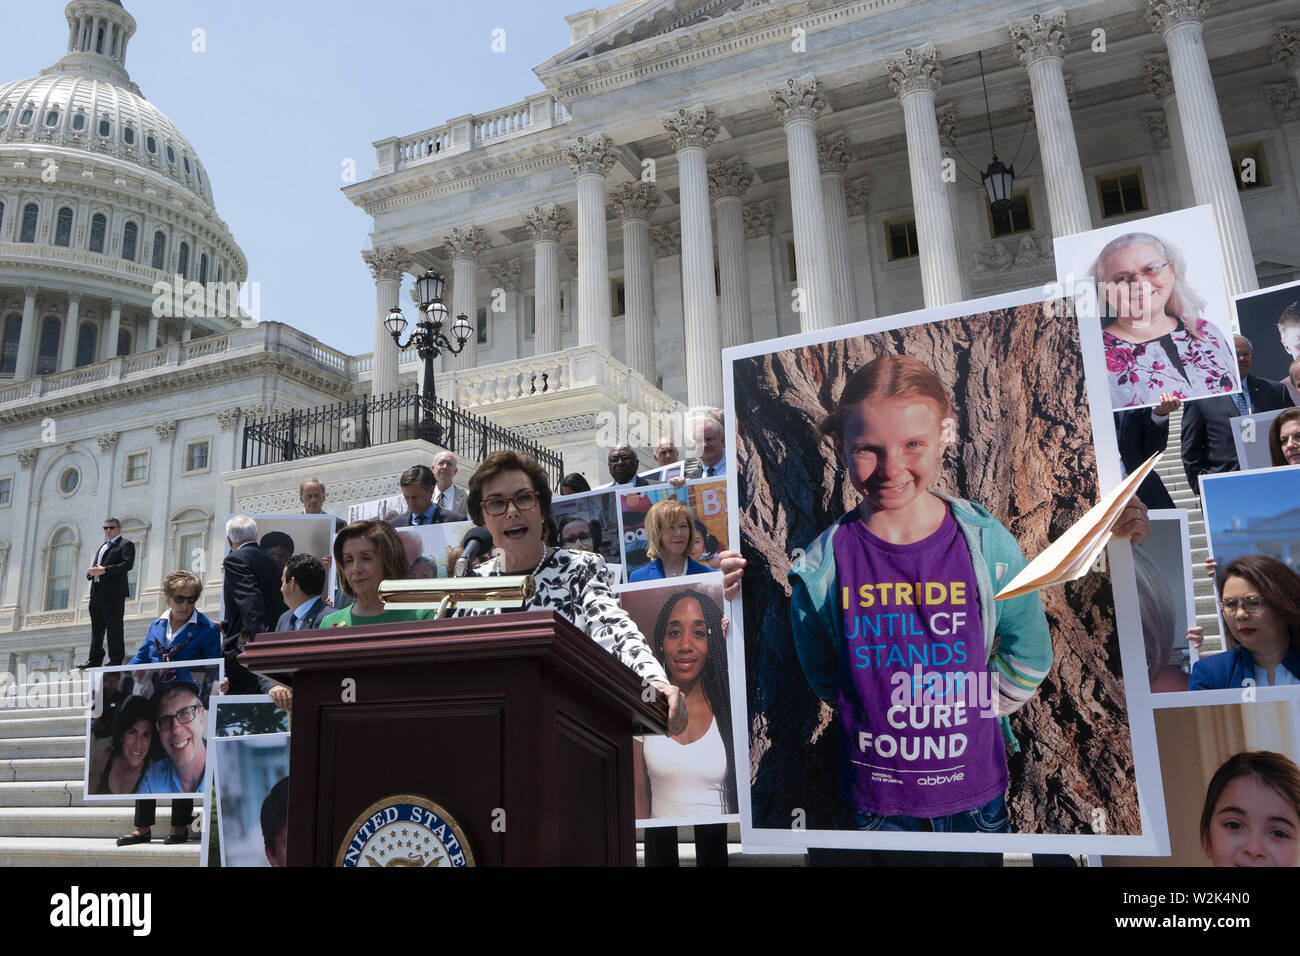 July 9, 2019 - Washington, District of Columbia, U.S. - United States Senator Jacky Rosen (Democrat of Nevada) speaks during a press conference on Capitol Hill in Washington D.C., U.S. to discuss health care coverage for those with pre-existing conditions on July 9, 2019.. .Credit: Stefani Reynolds / CNP (Credit Image: © Stefani Reynolds/CNP via ZUMA Wire) Stock Photo